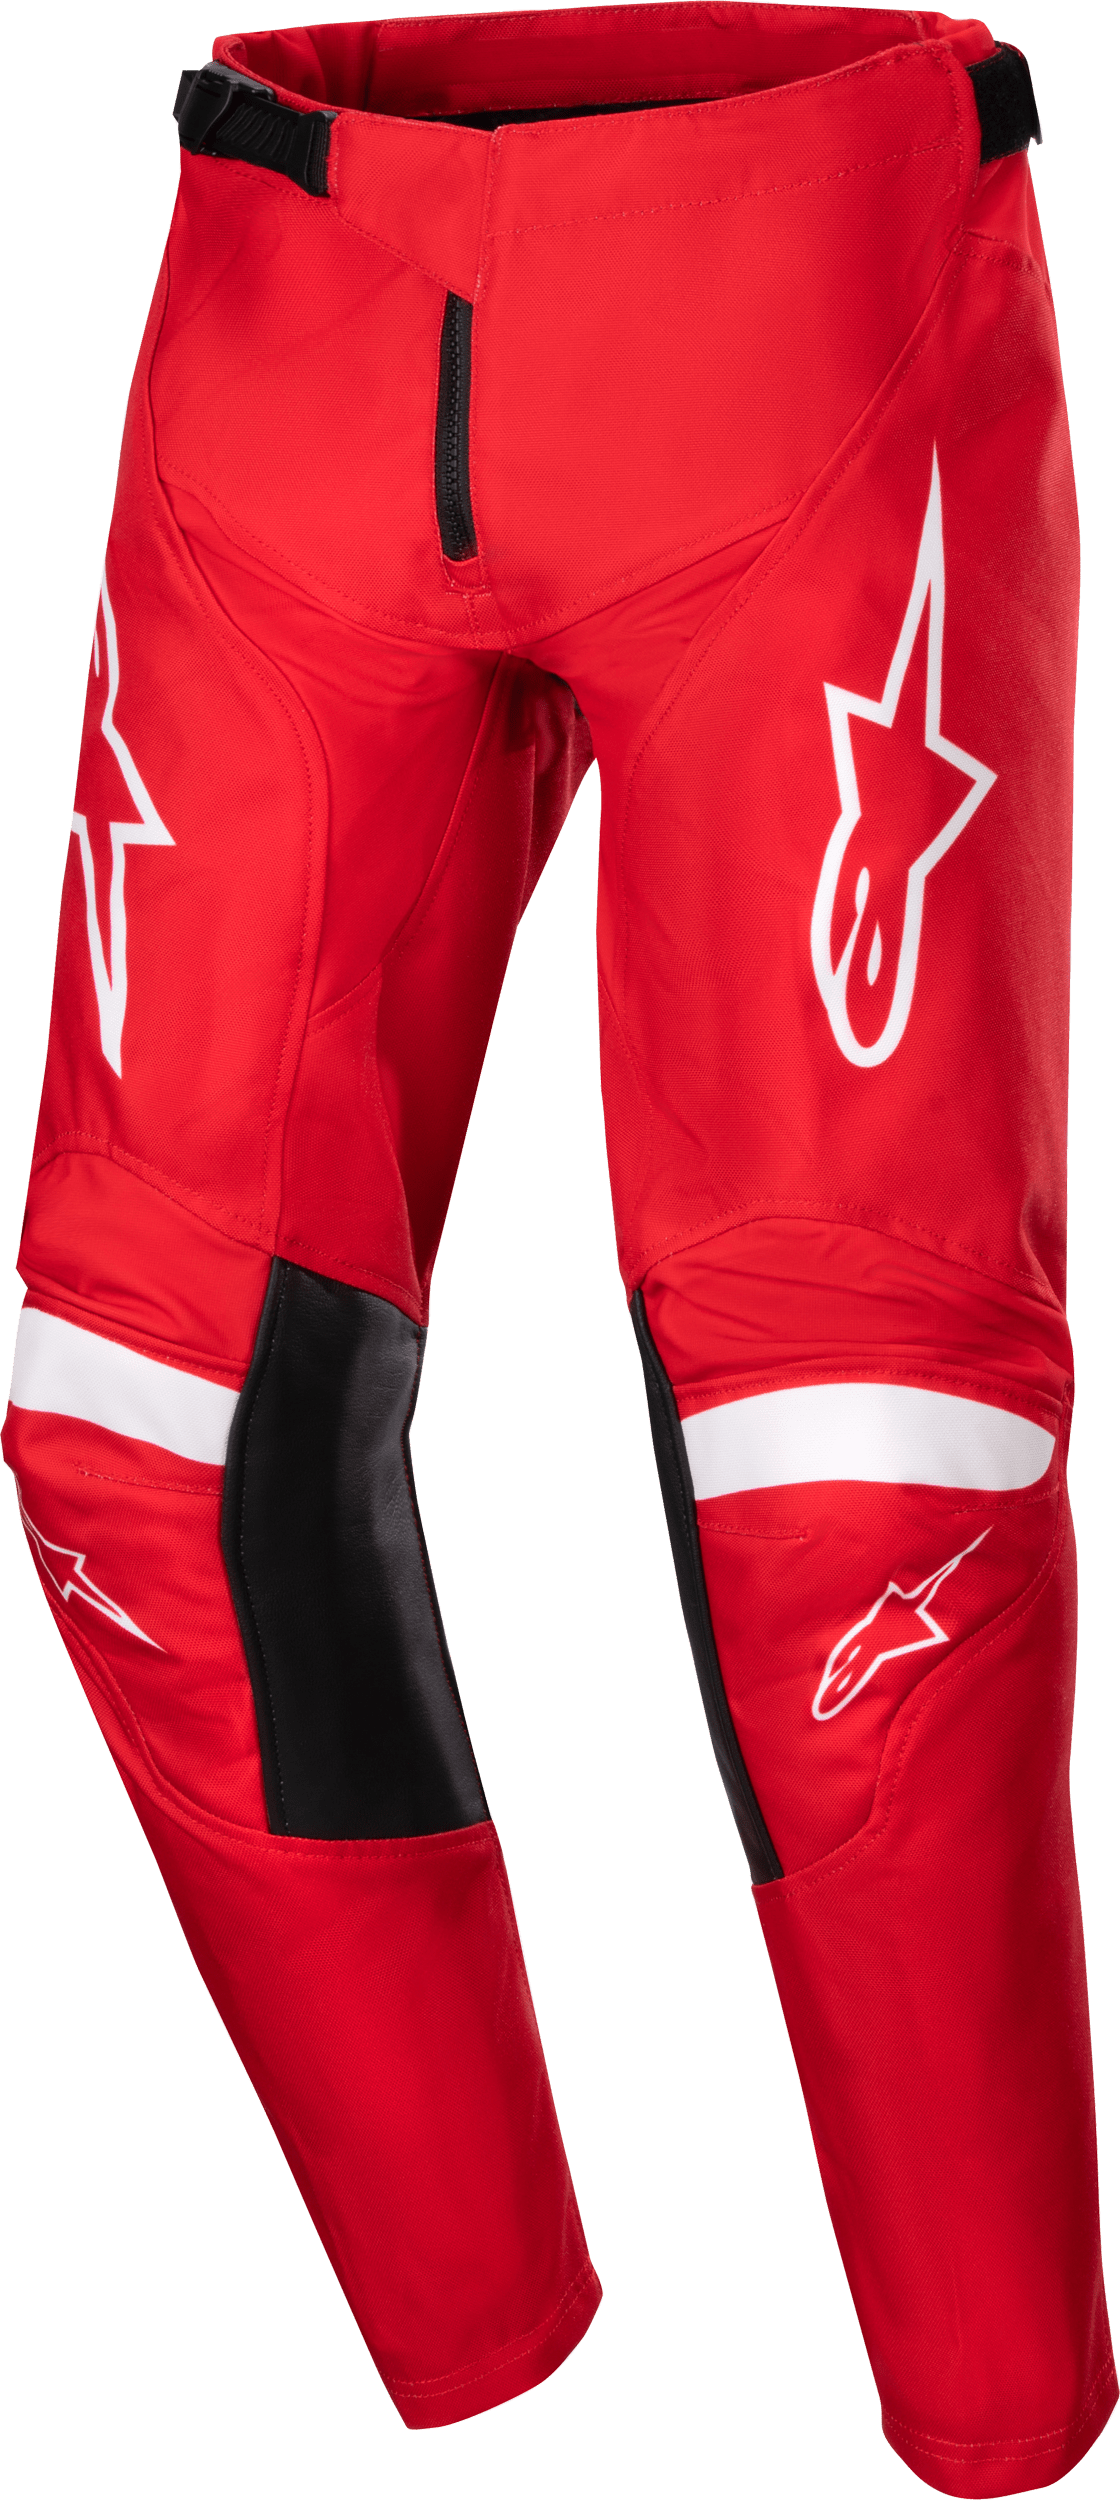 Western Powersports Pants Mars Red/White / 22 Youth Racer Lurv Pants By Alpinestars 3743924-3120-22